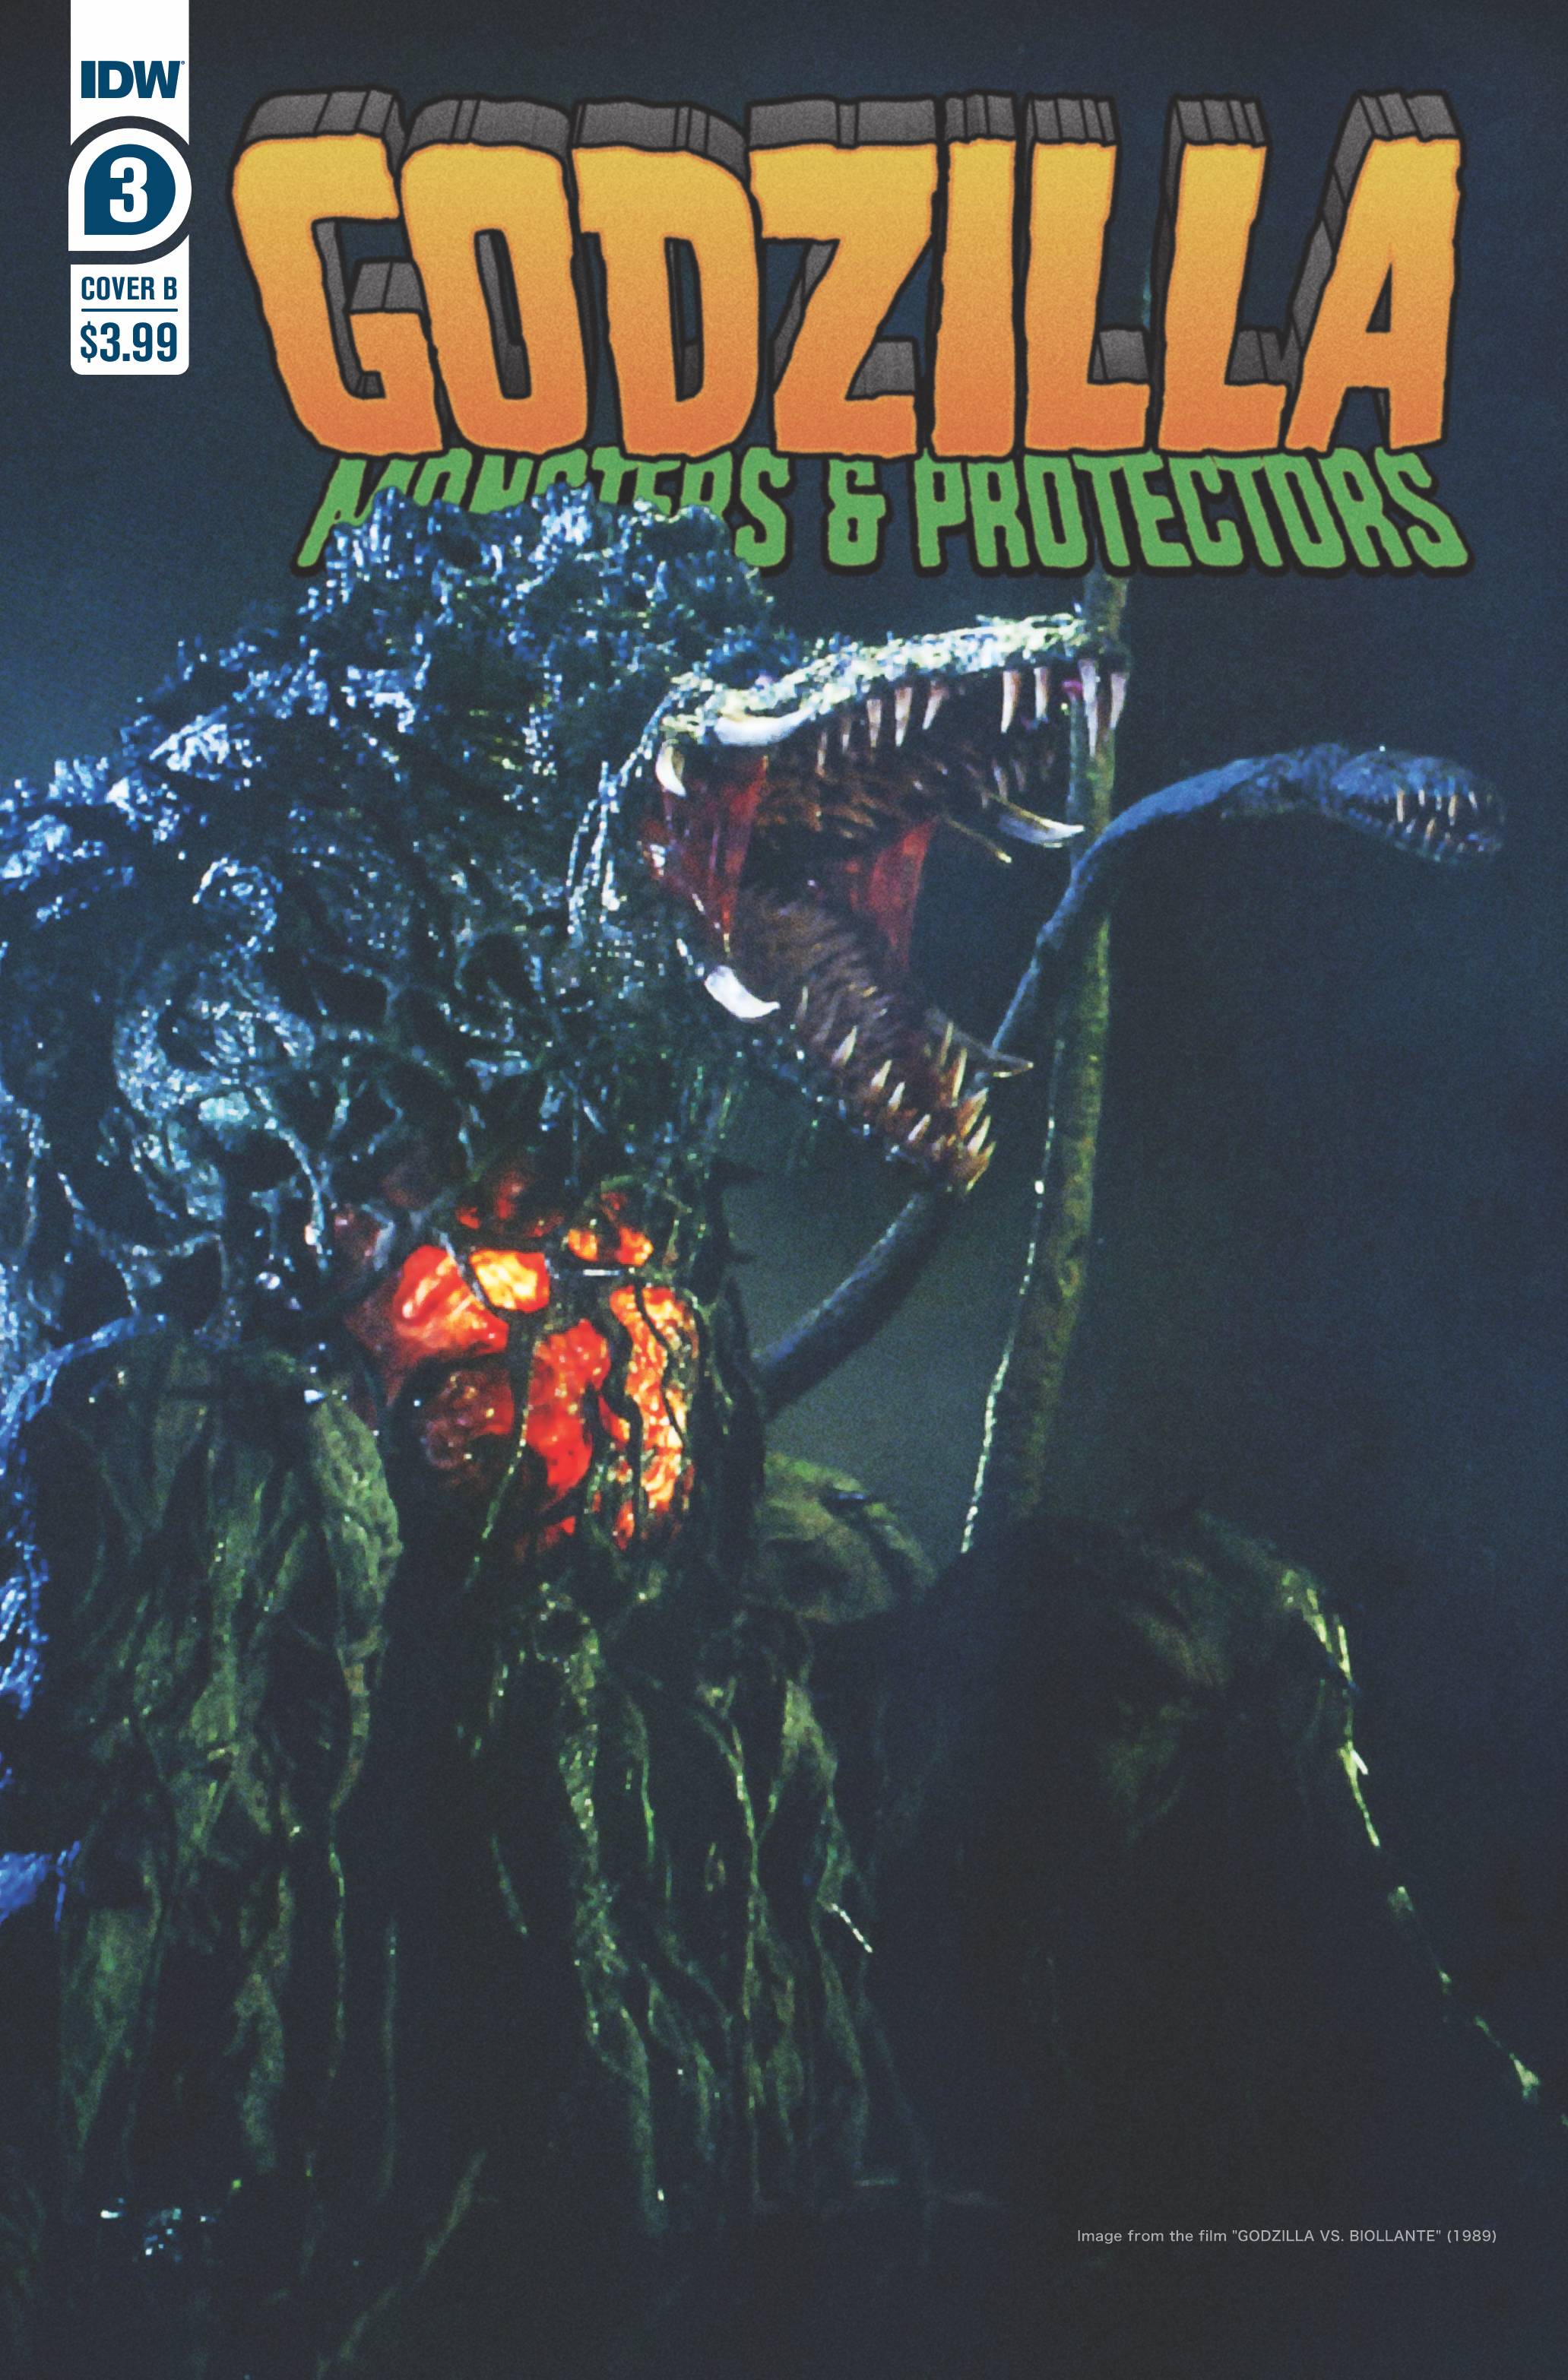 Godzilla Monsters & Protectors #3 Cover B Photo Cover